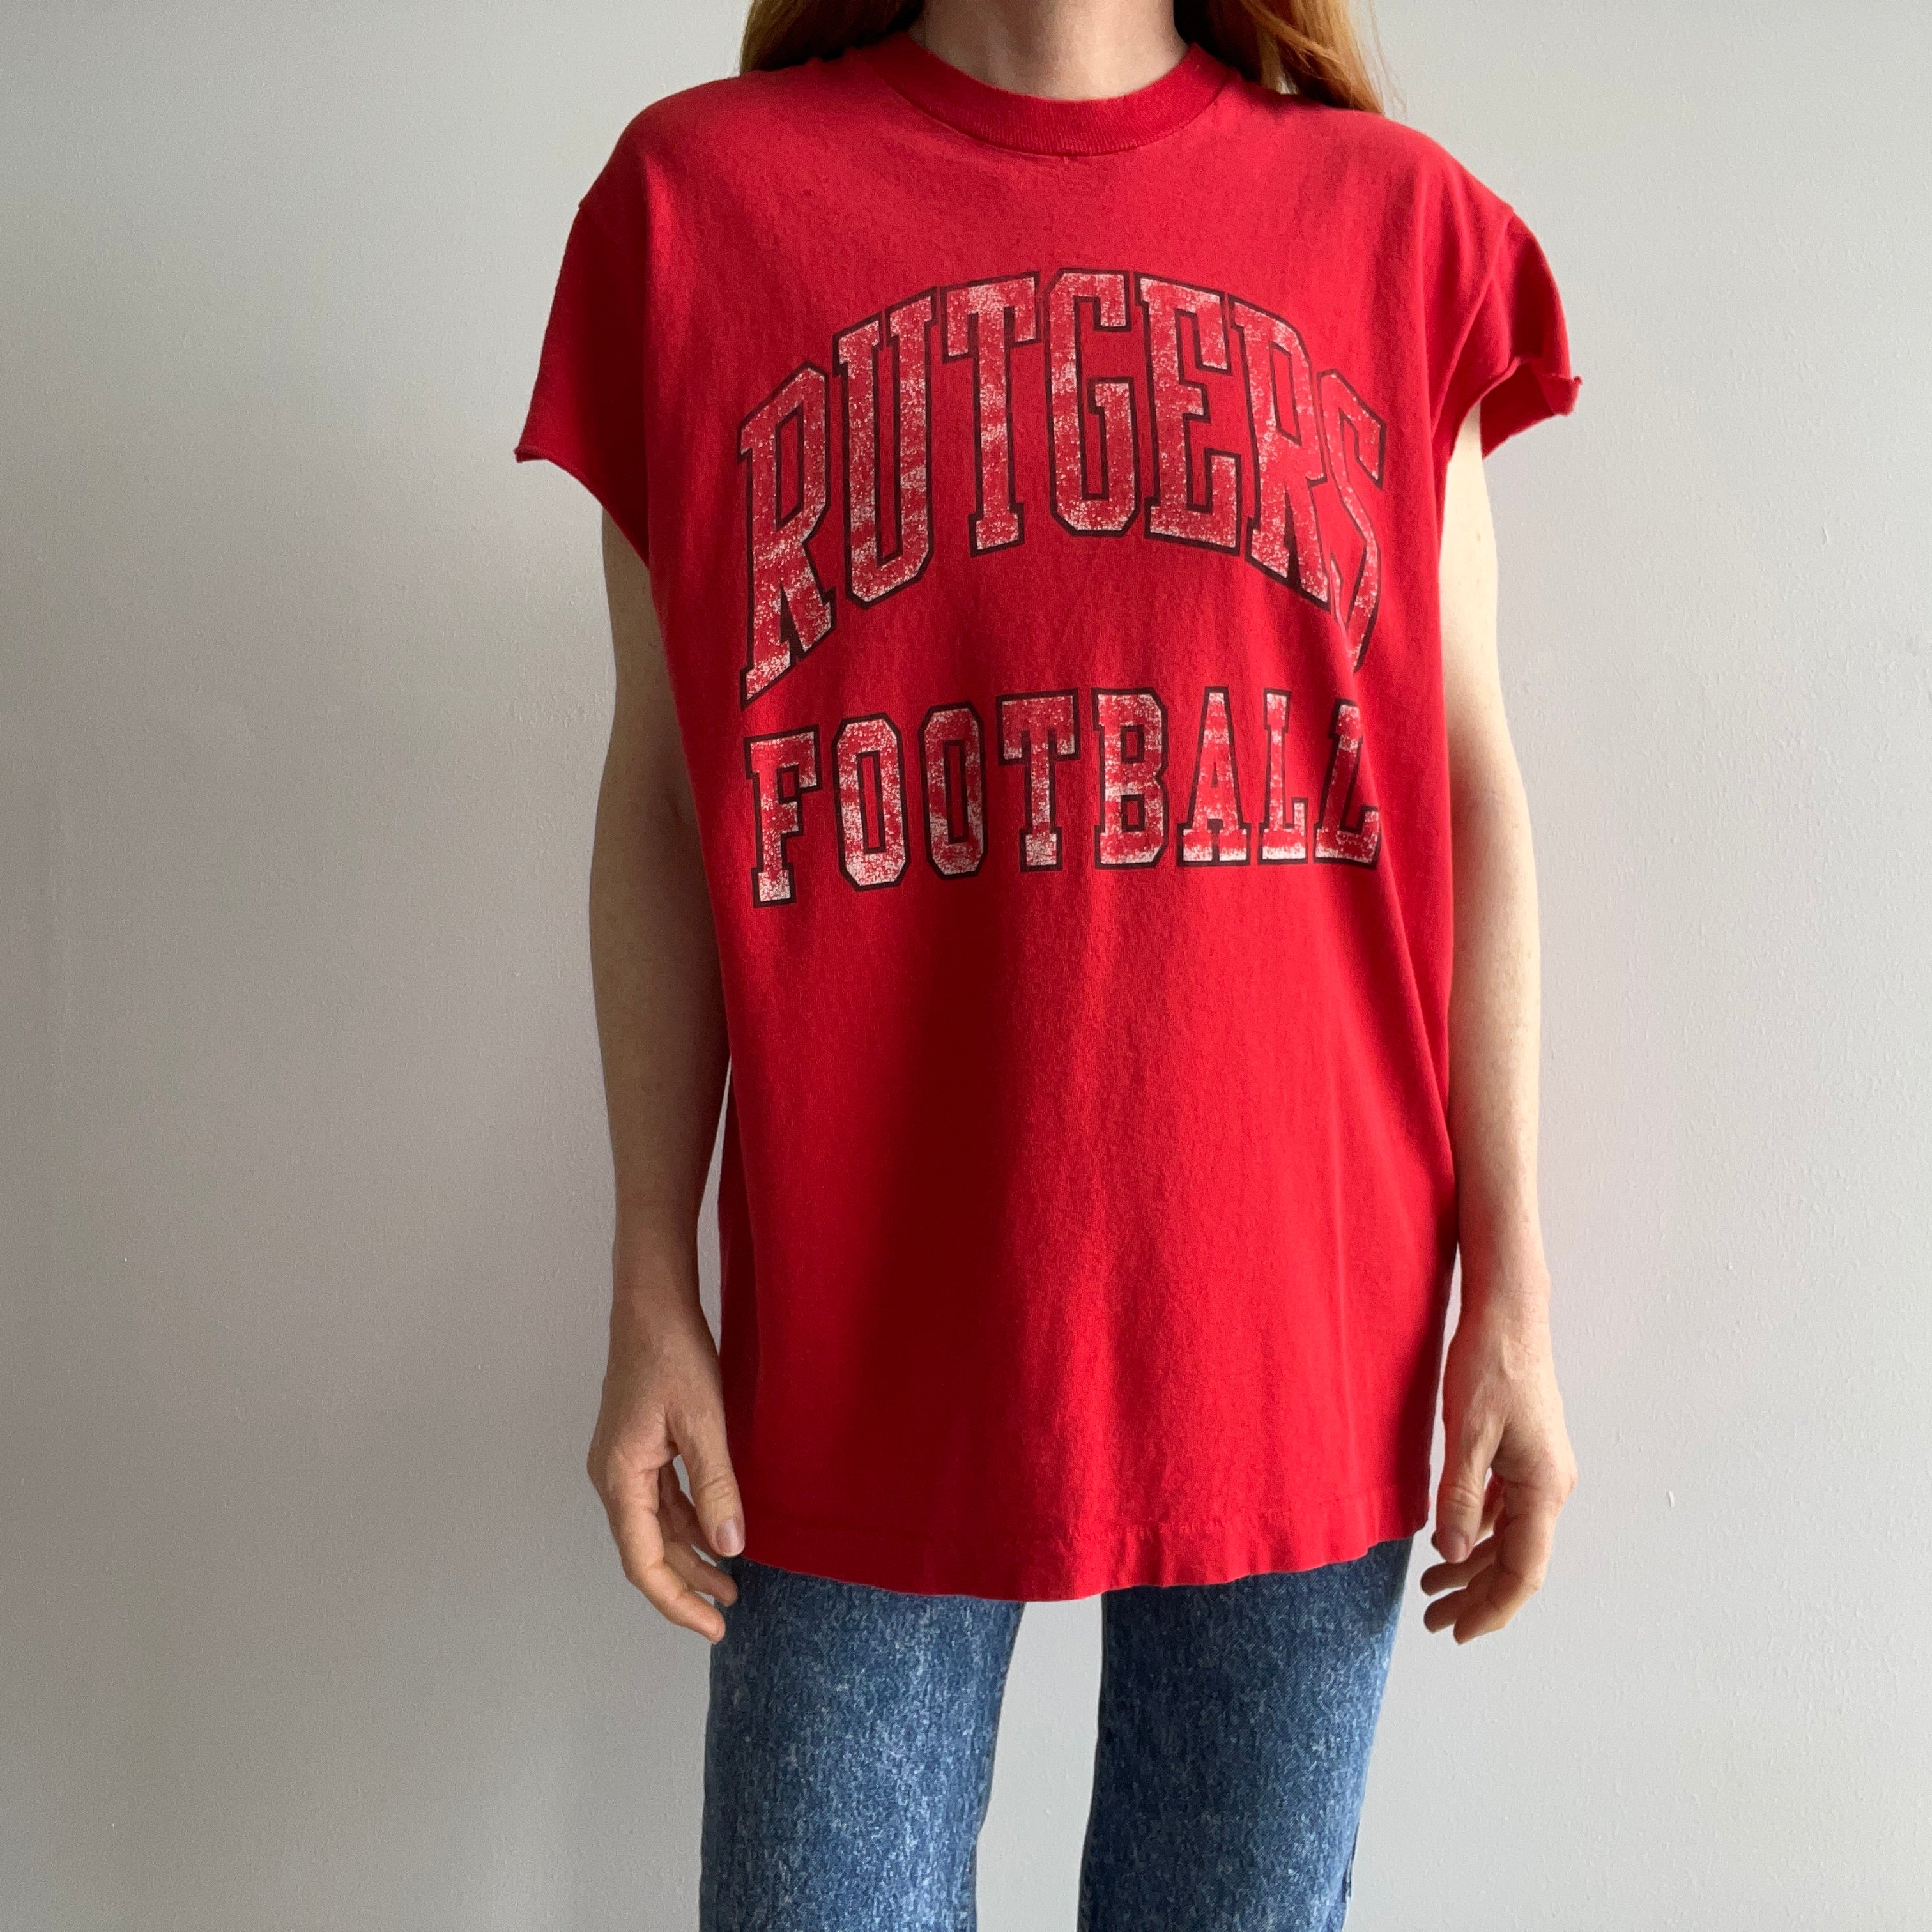 1980/90s Rutgers Football Destroyed Sleeves T-Shirt